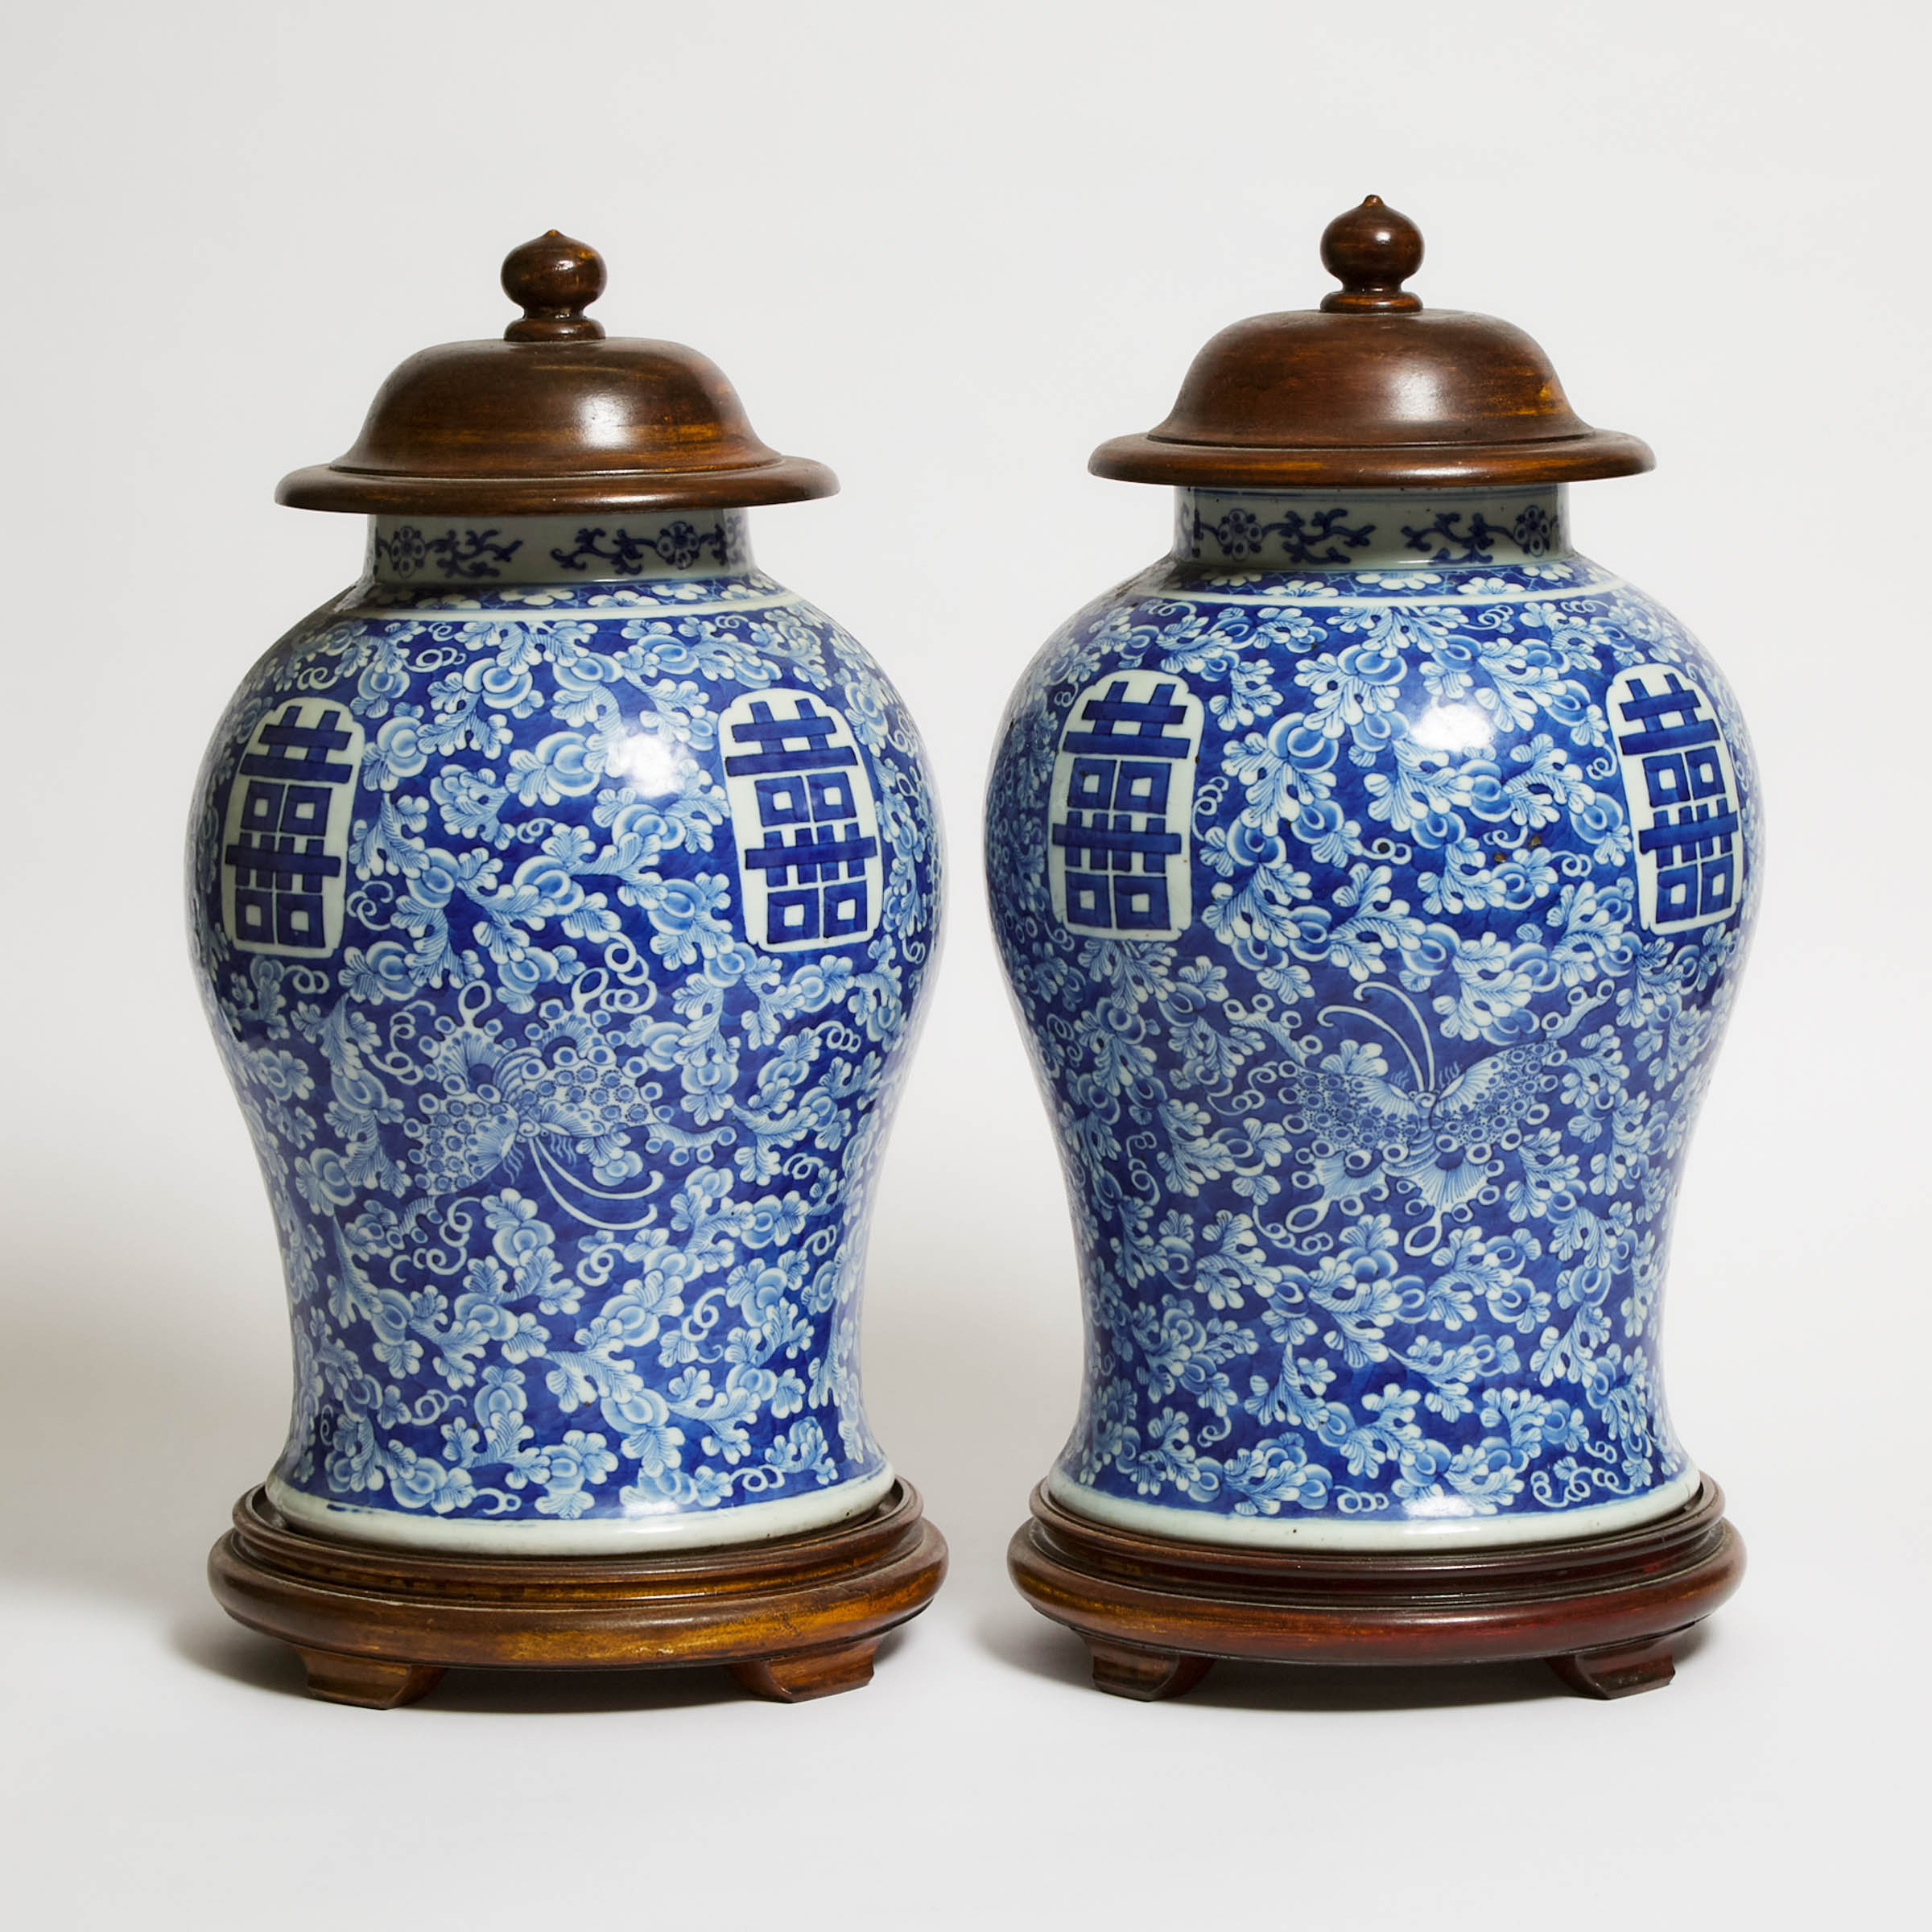 A Pair of Blue and White 'Double Happiness' Baluster Jars, 19th Century